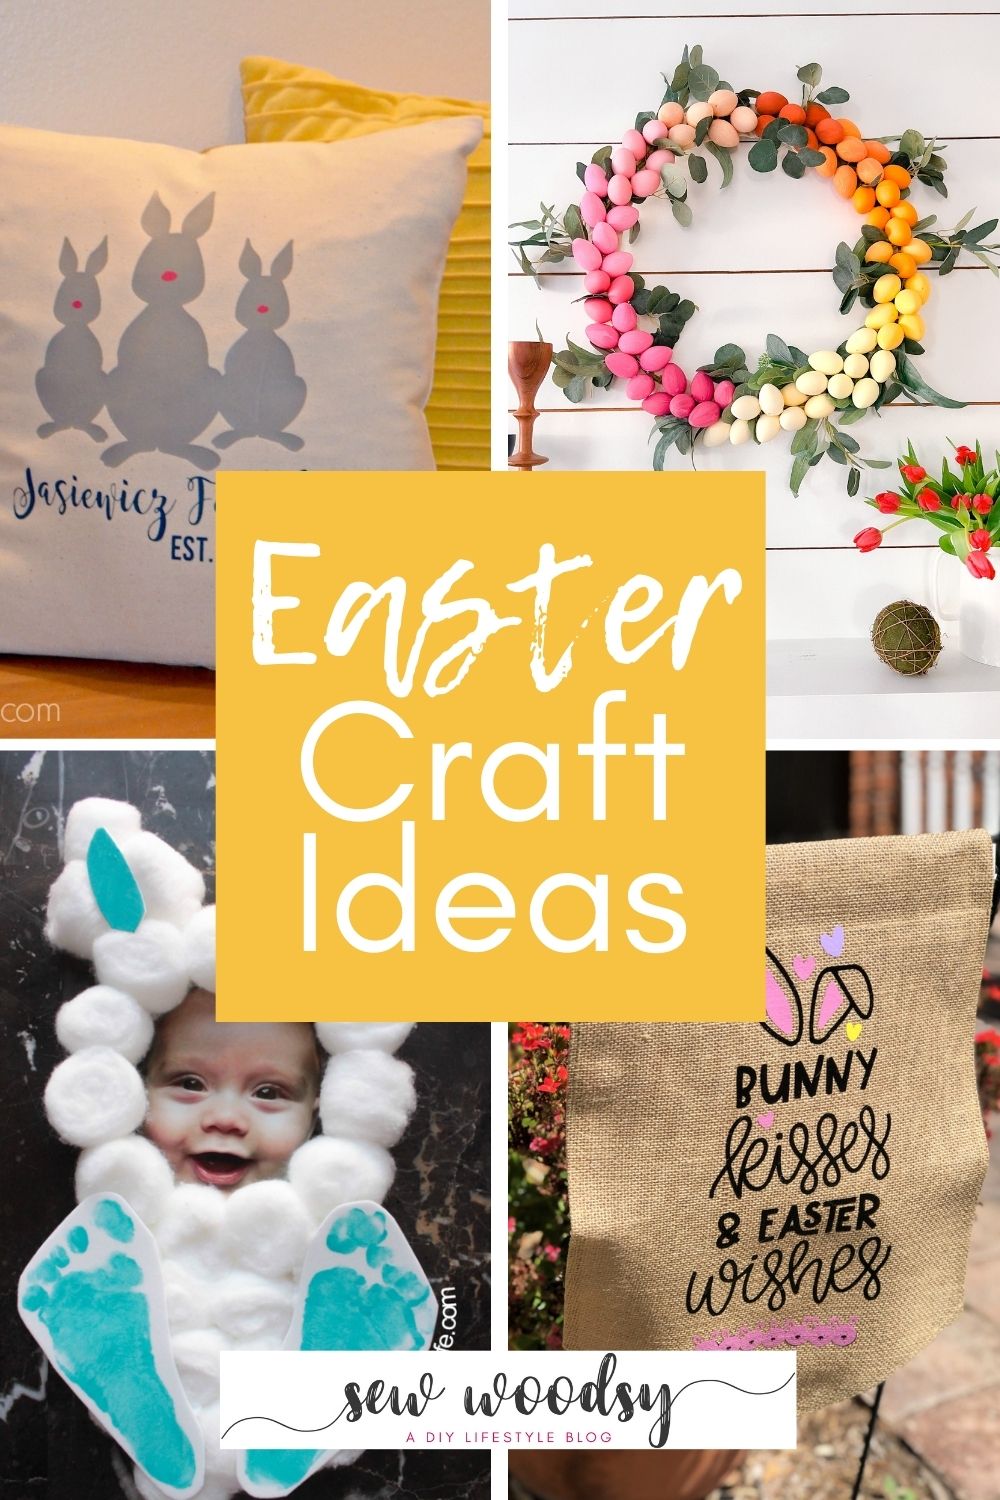 Four photos of Easter crafts with text title on image for Pinterest.